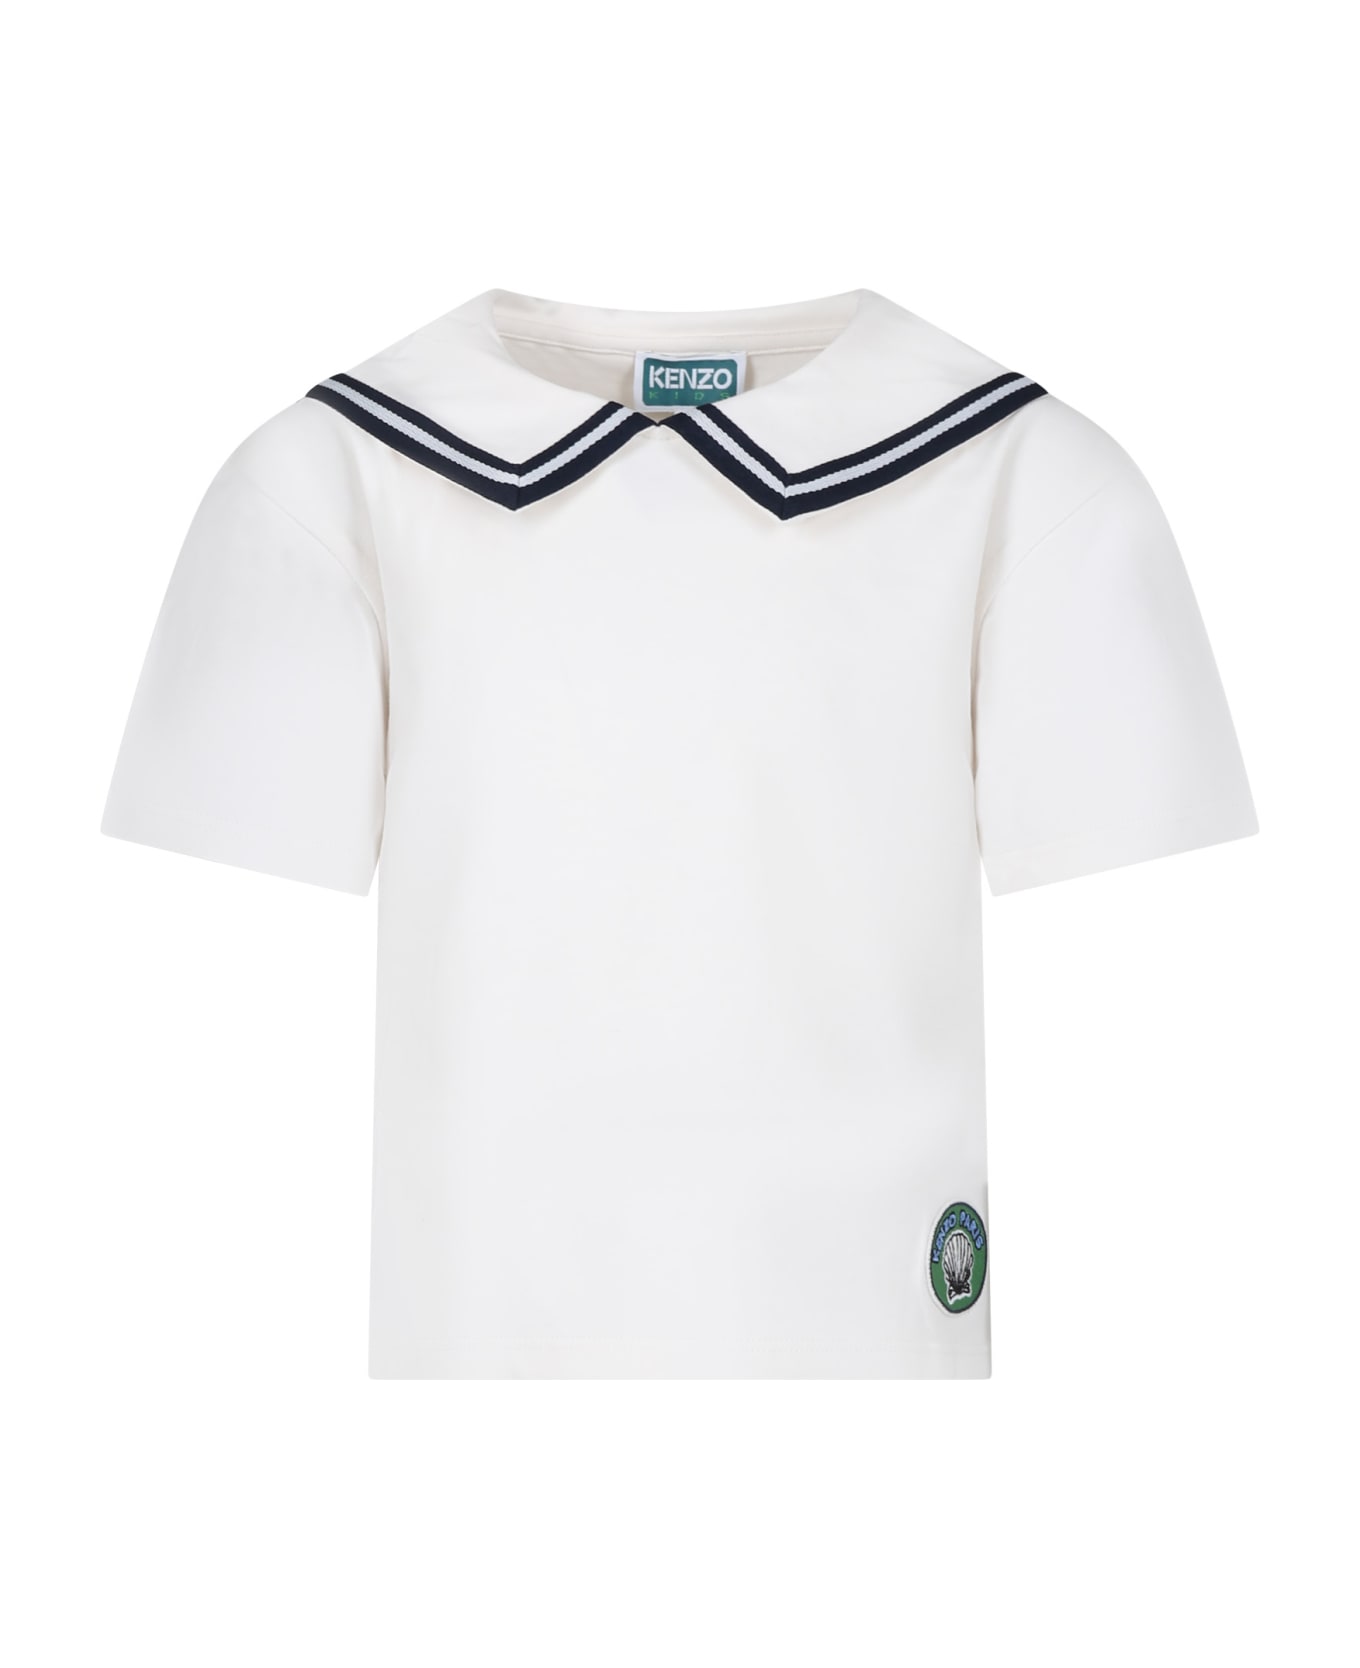 Kenzo Kids Ivory T-shirt For Boy With Logo Patch - Ivory